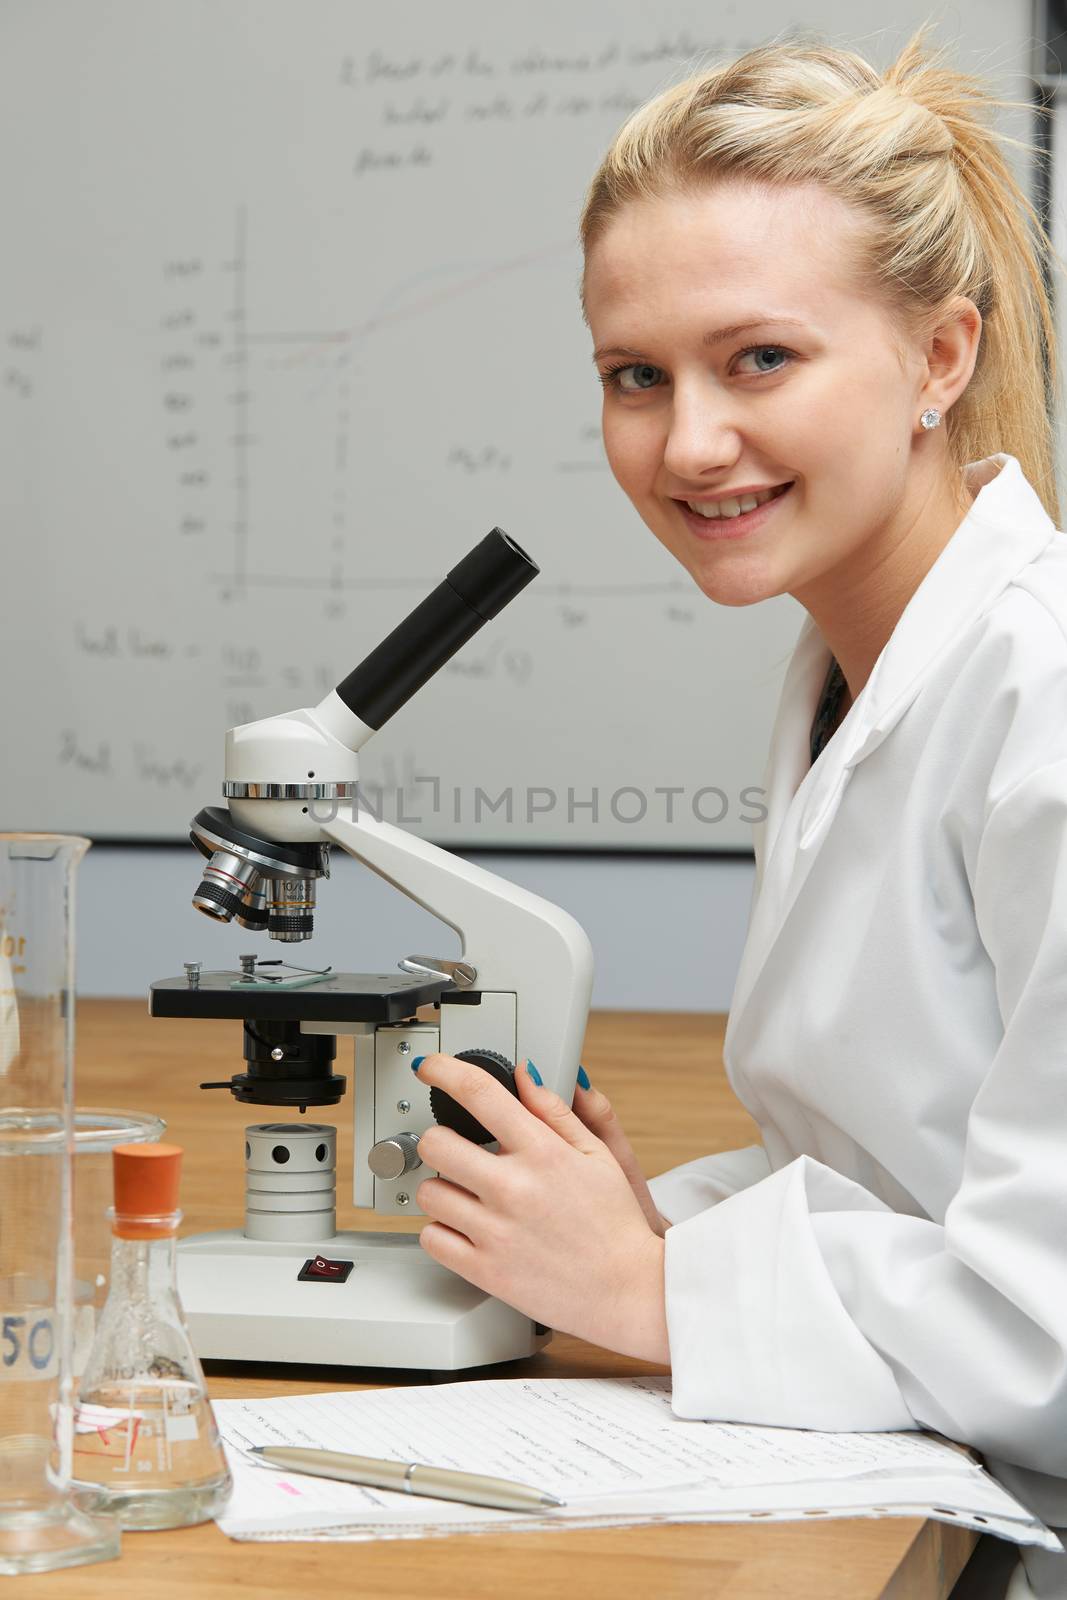 Female Pupil Using Microscope In Science Lesson by HWS